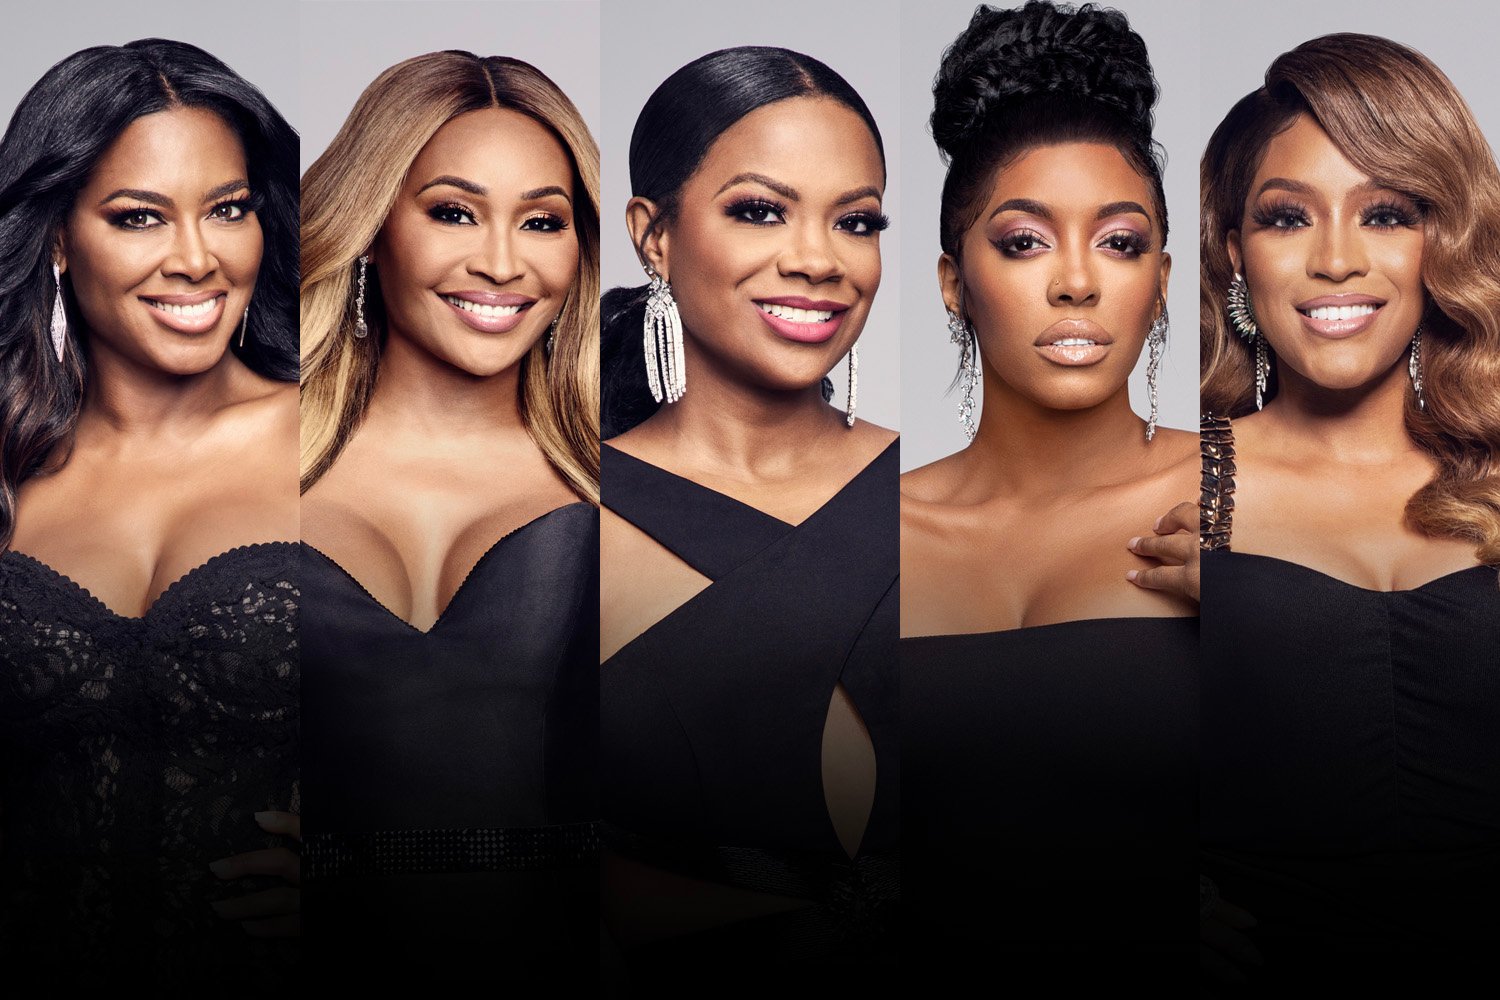 ‘RHOA’ Season 13 Taglines: Shade, Kandi, Hills, and Social Justice Featured In Intro